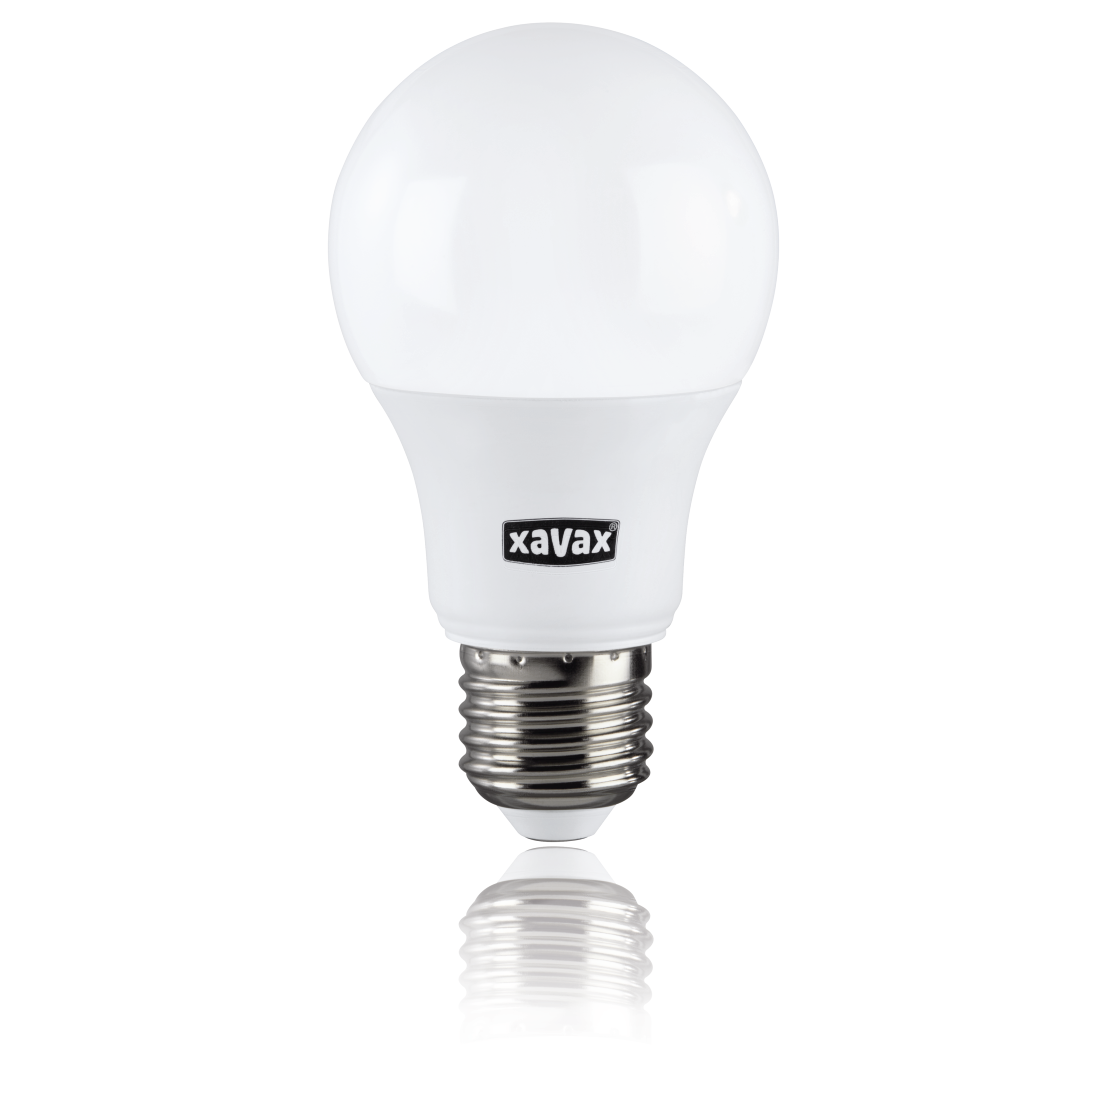 abx2 High-Res Image 2 - Xavax, LED Bulb, E27, 806lm replaces 60W, incandescent bulb, warm, dimmable